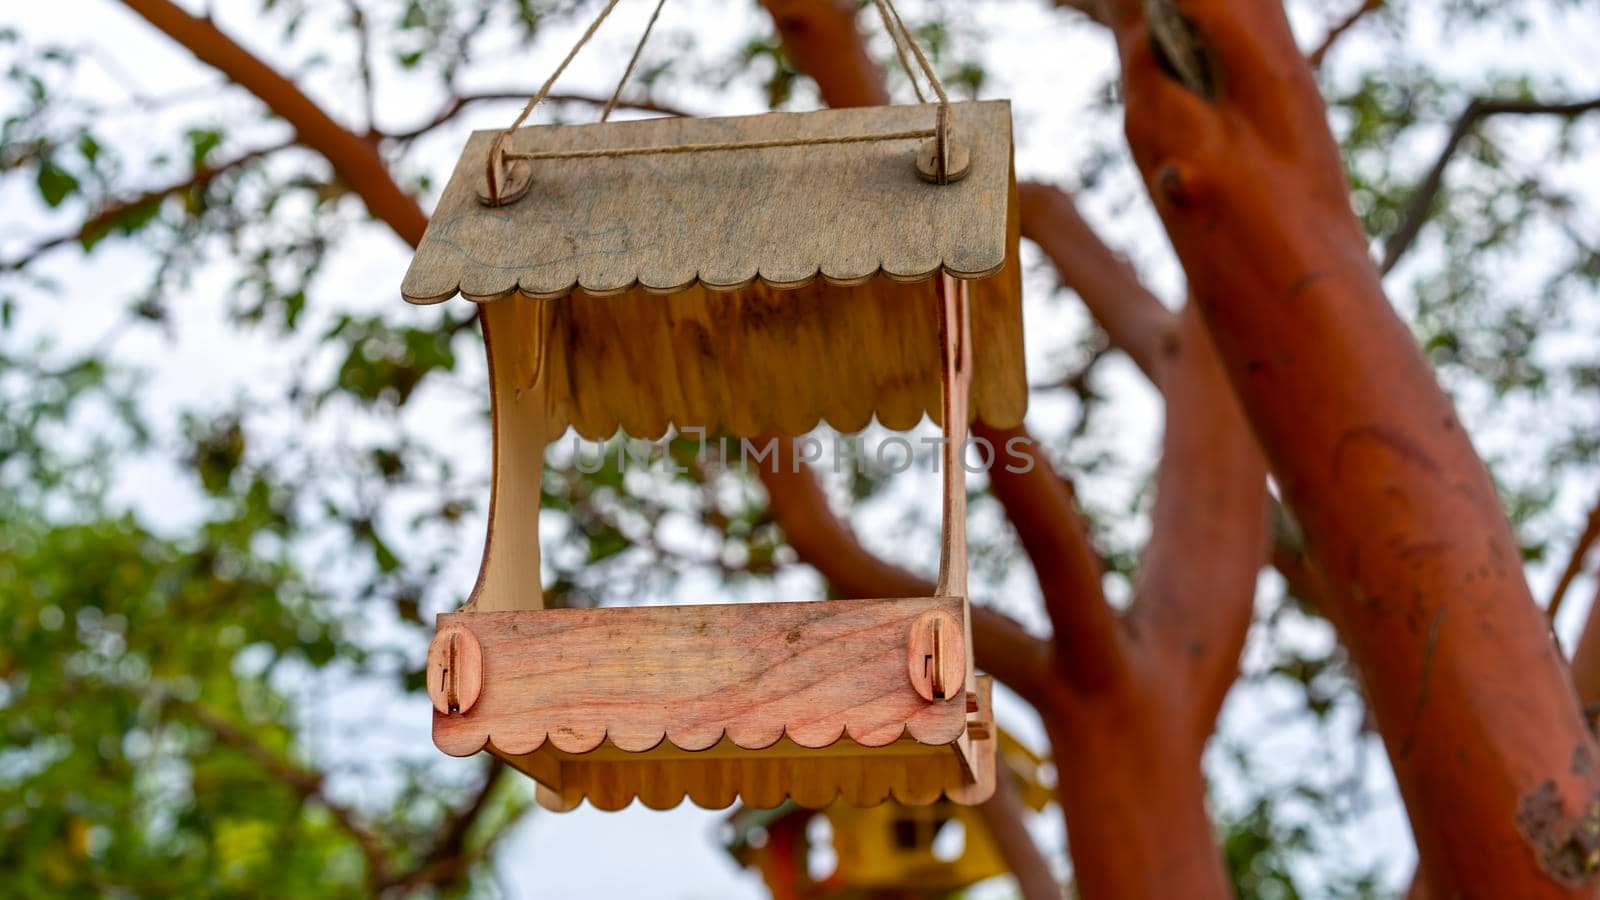 Wooden bird feeders on a blurry background of trees by Vvicca